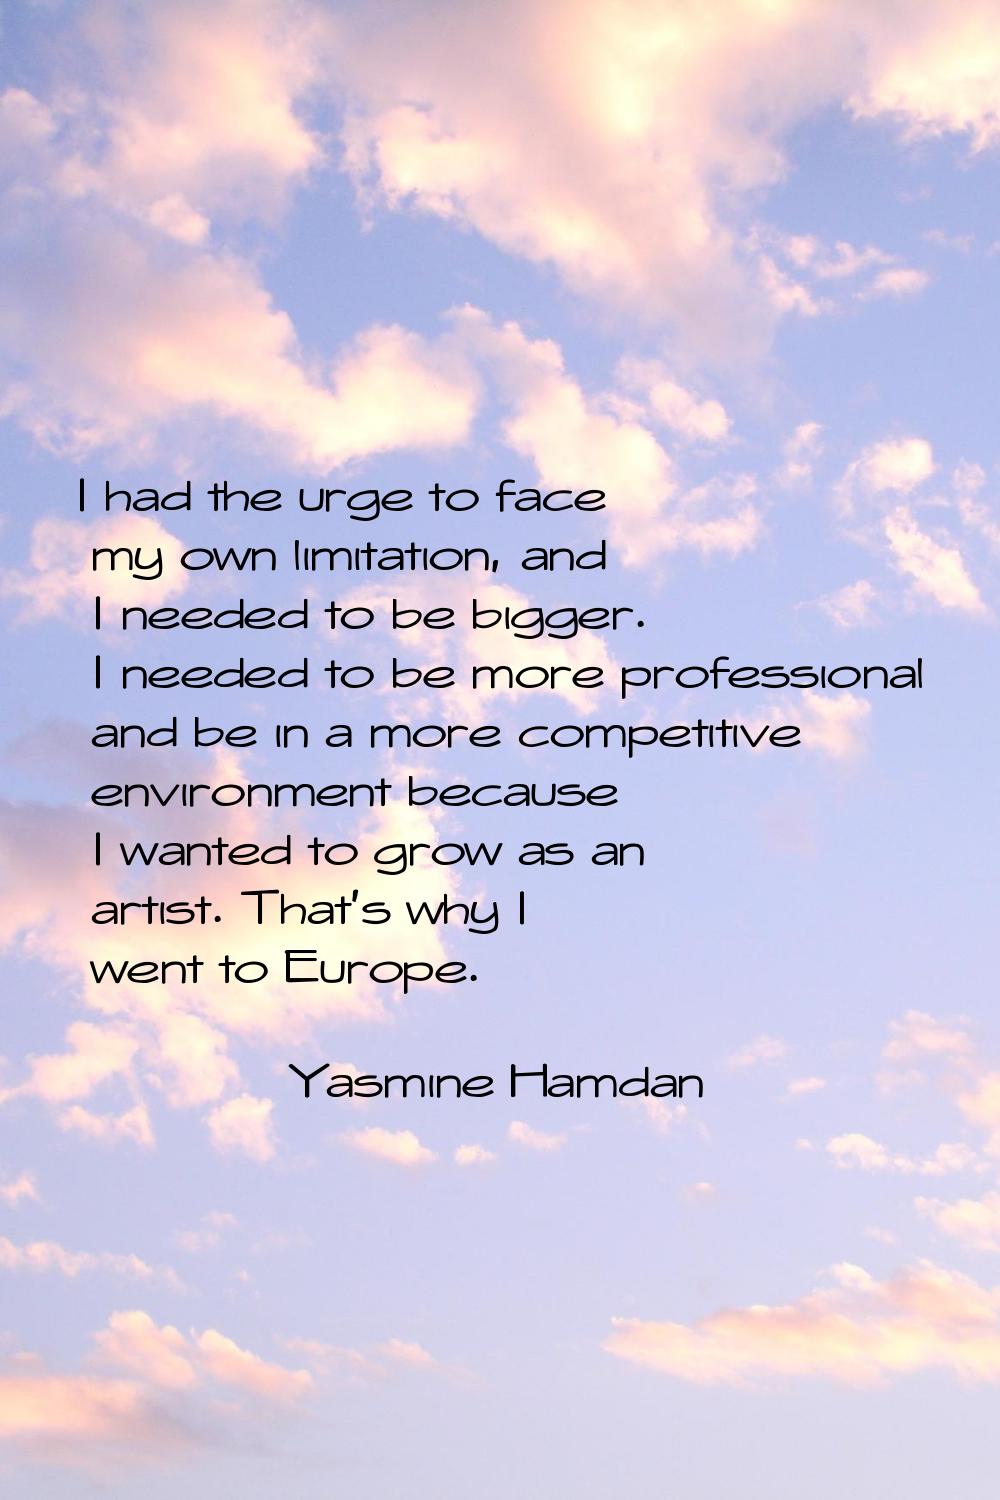 I had the urge to face my own limitation, and I needed to be bigger. I needed to be more profession